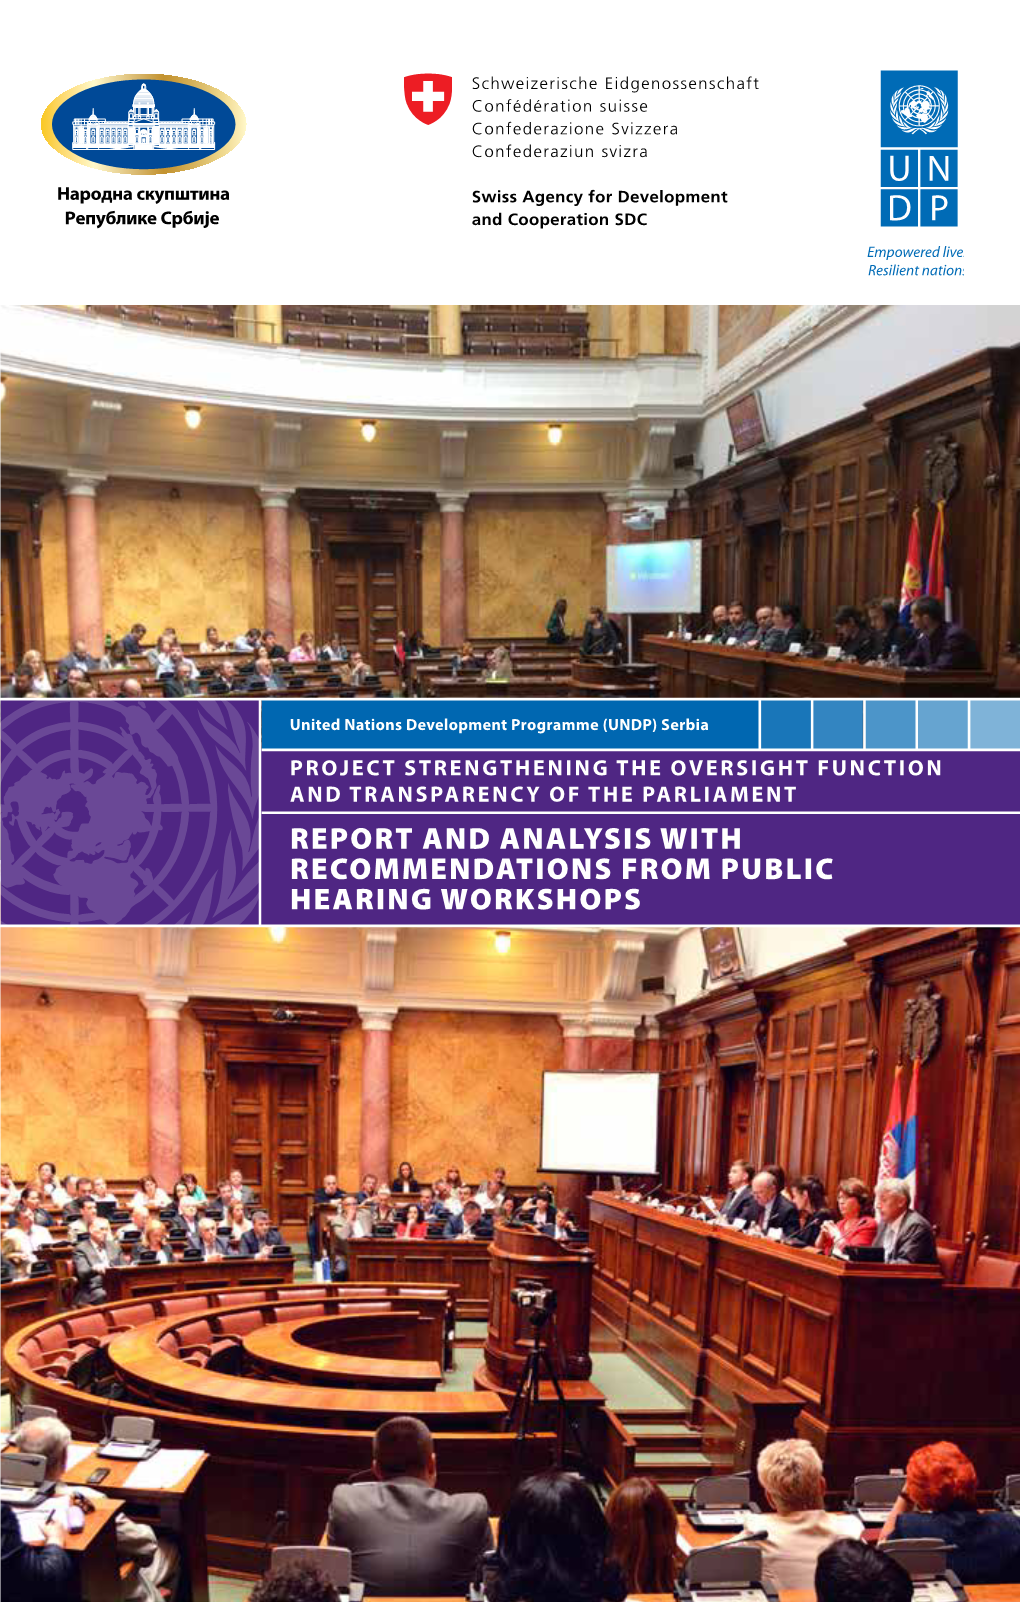 Report and Analysis with Recommendations from Public Hearing Workshops